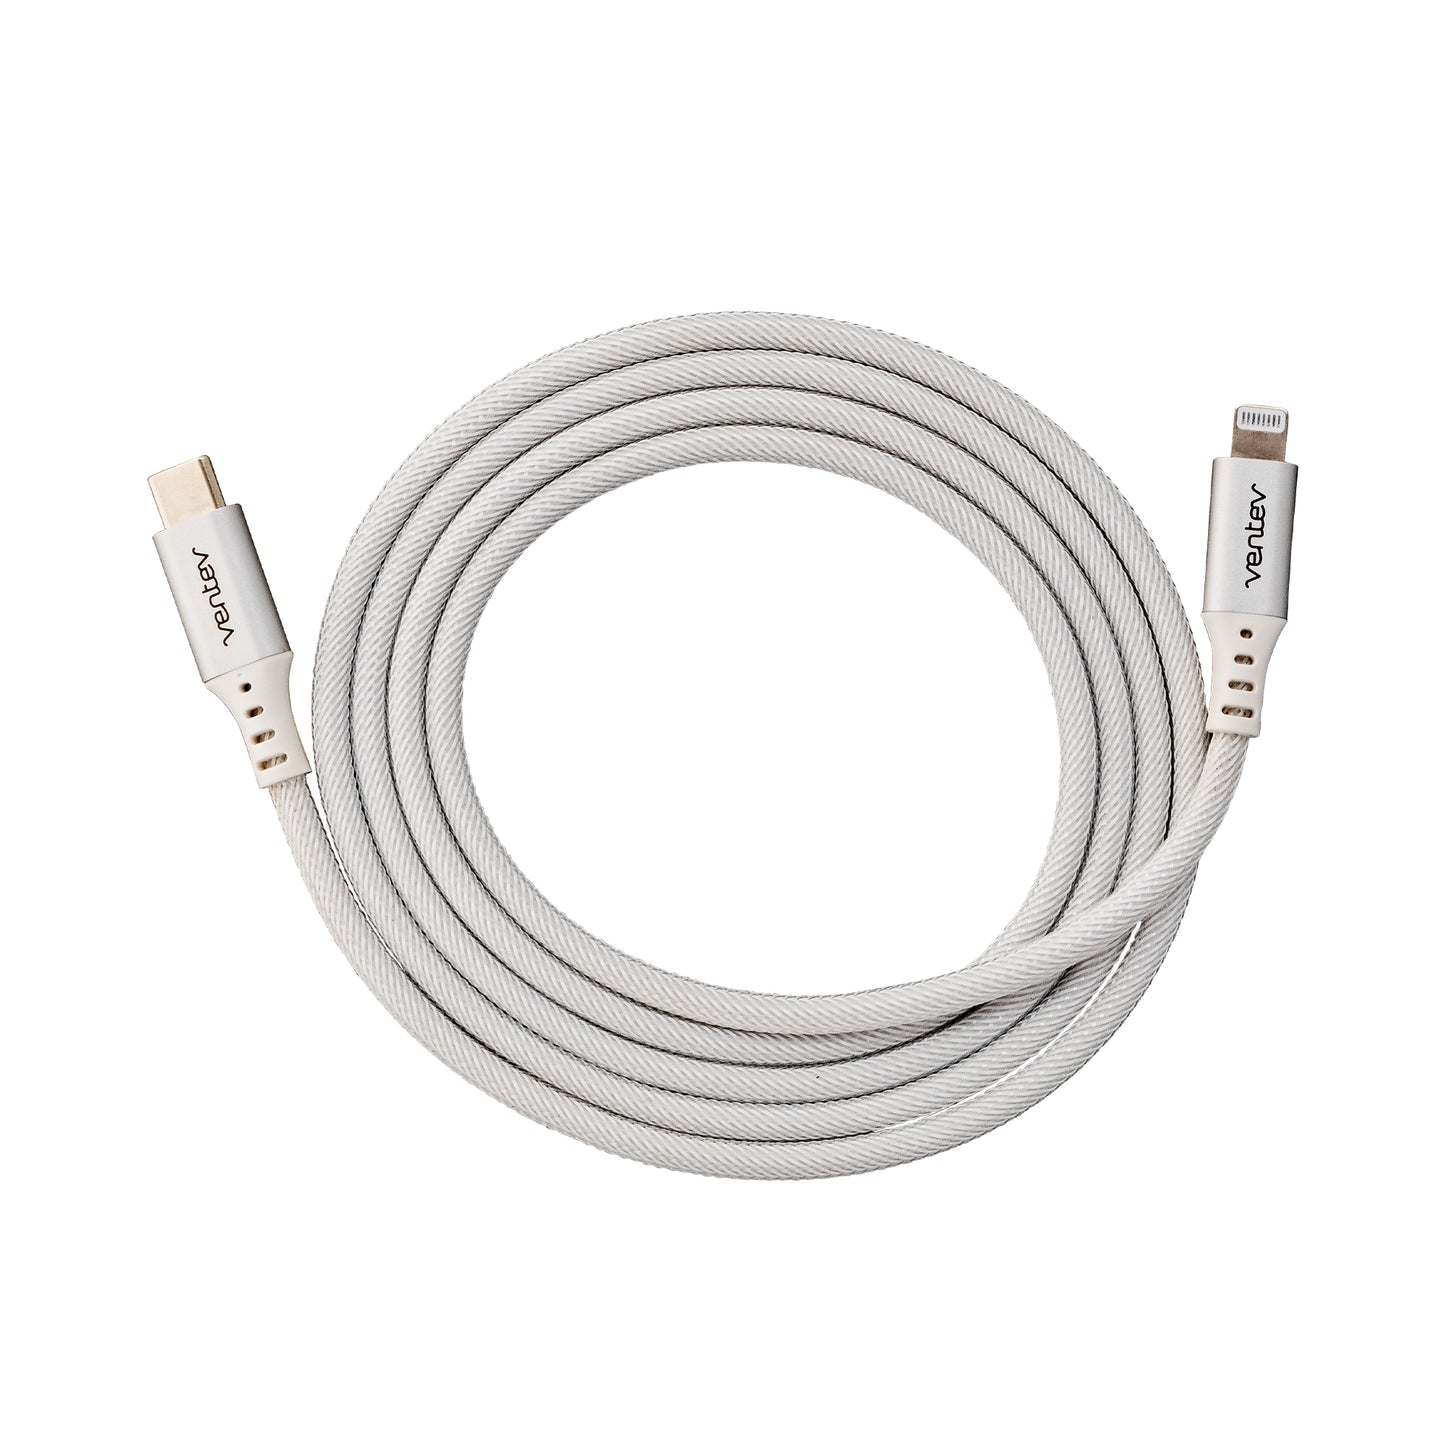 VENTEV Chargesync Alloy USB C- to Lightning Cable 4ft - White